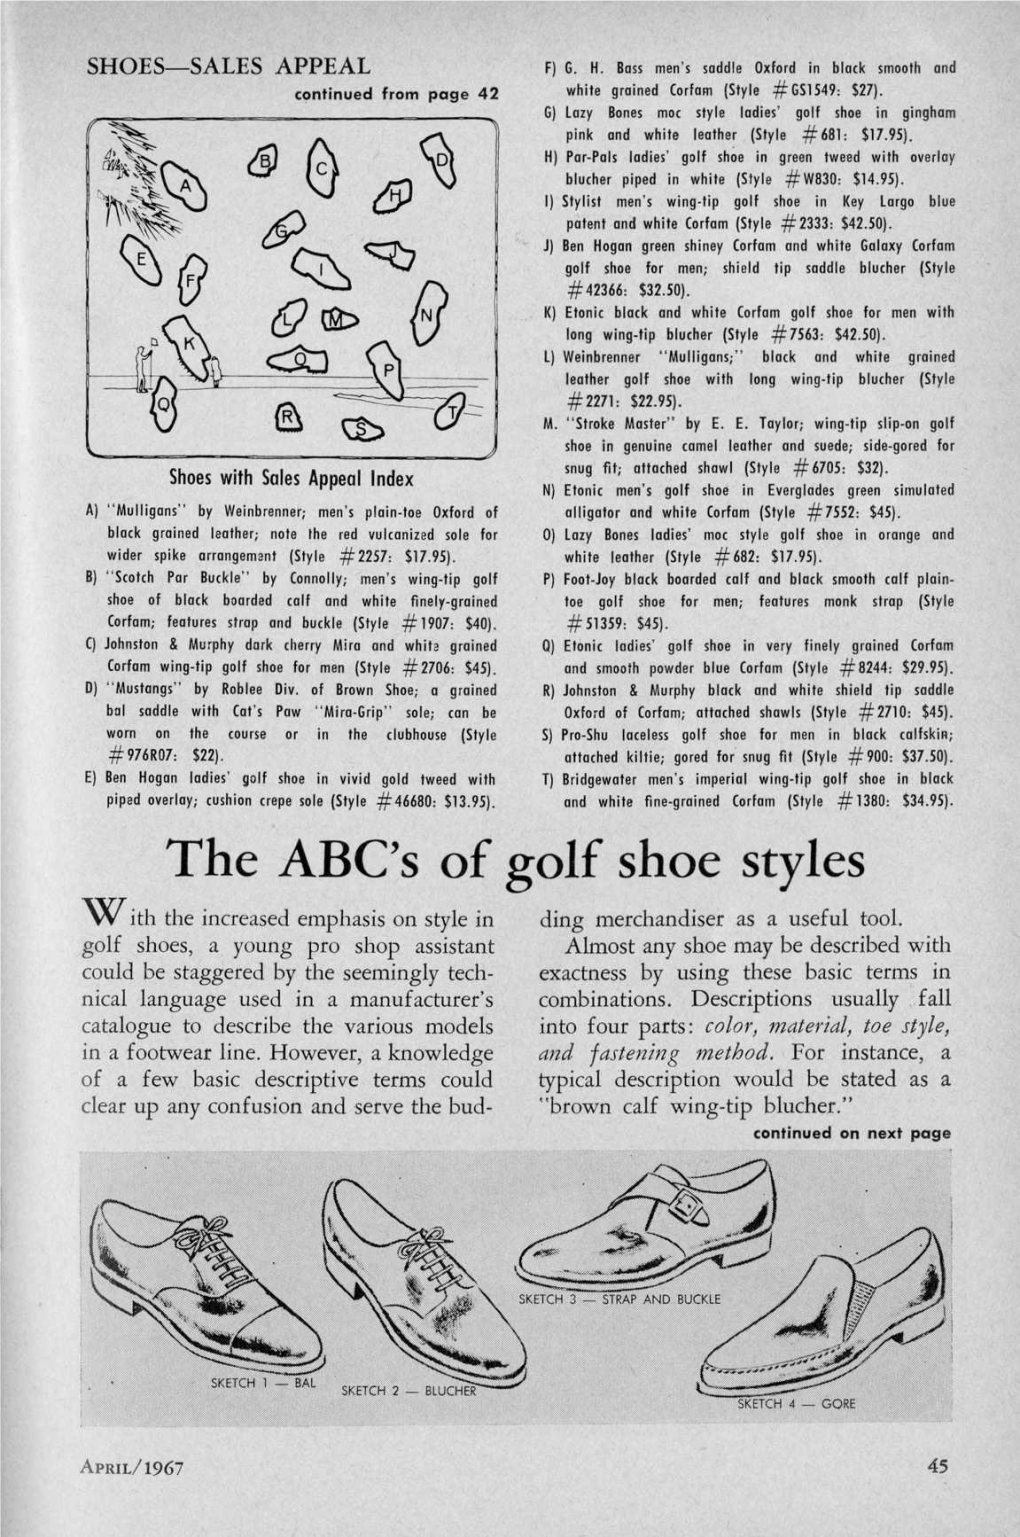 The ABC's of Golf Shoe Styles with the Increased Emphasis on Style in Ding Merchandiser As a Useful Tool